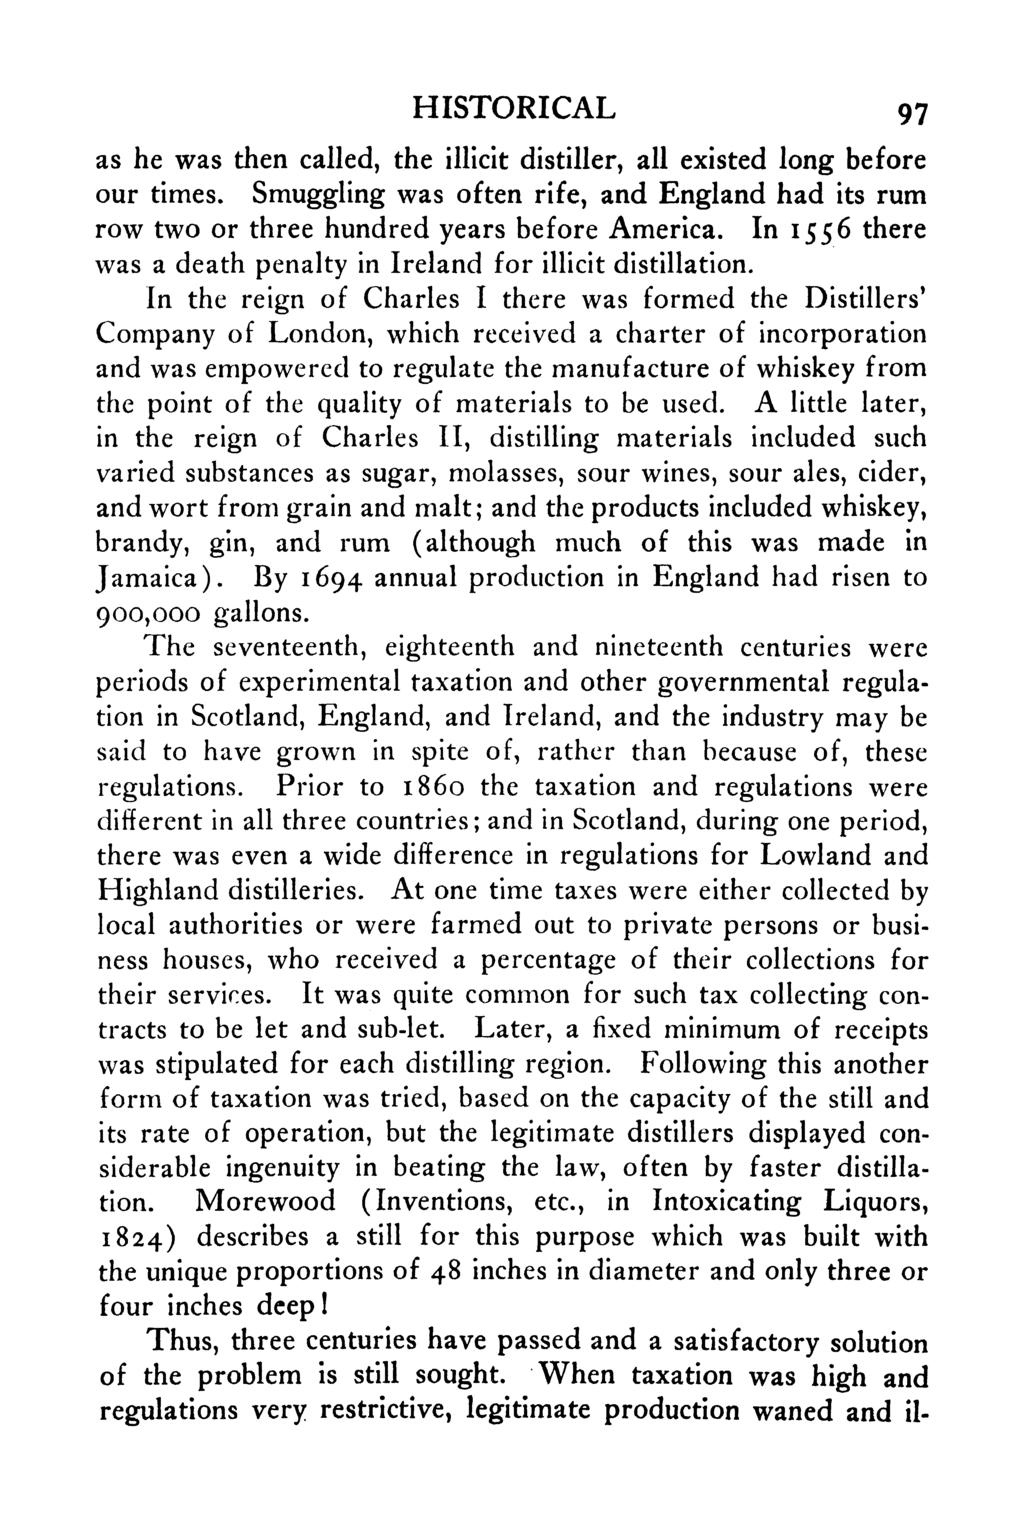 HISTORICAL 97 as he was then called, the illicit distiller, all existed long before our times. Smuggling was often rife, and England had its rum row two or three hundred years before America.